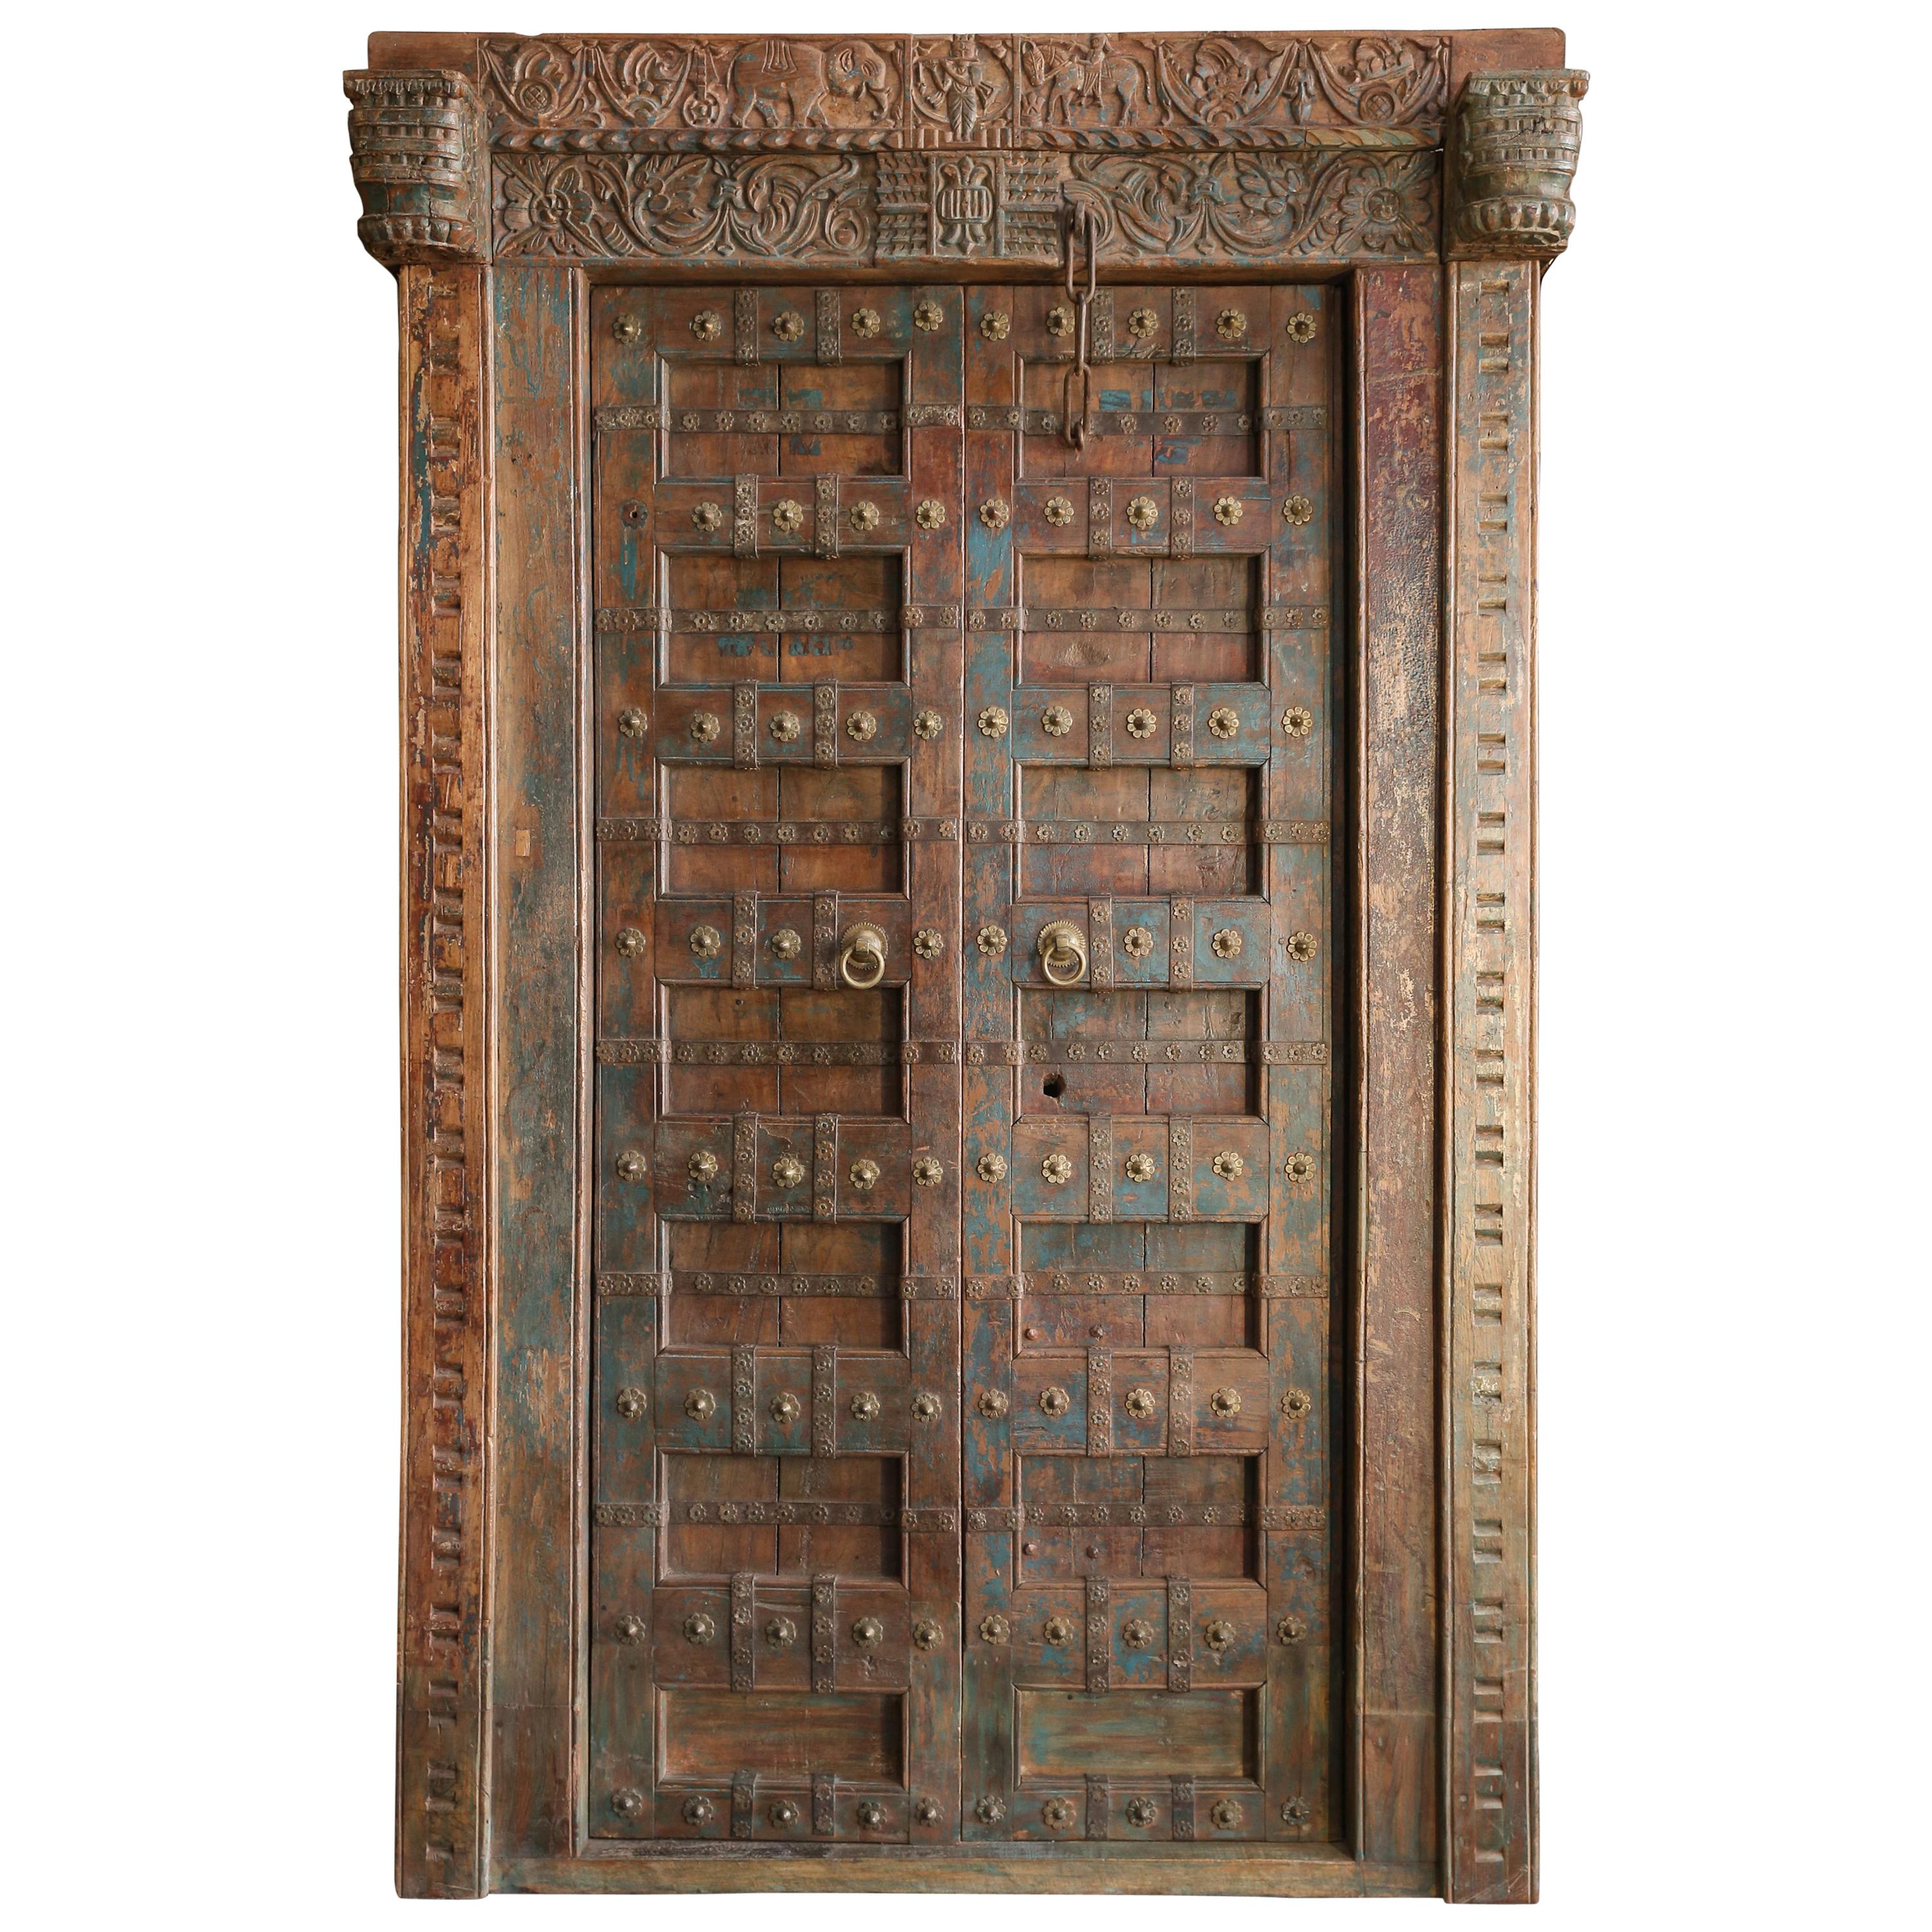 1800s Solid Teak Wood Meticulously Handcrafted Temple Entry Doors